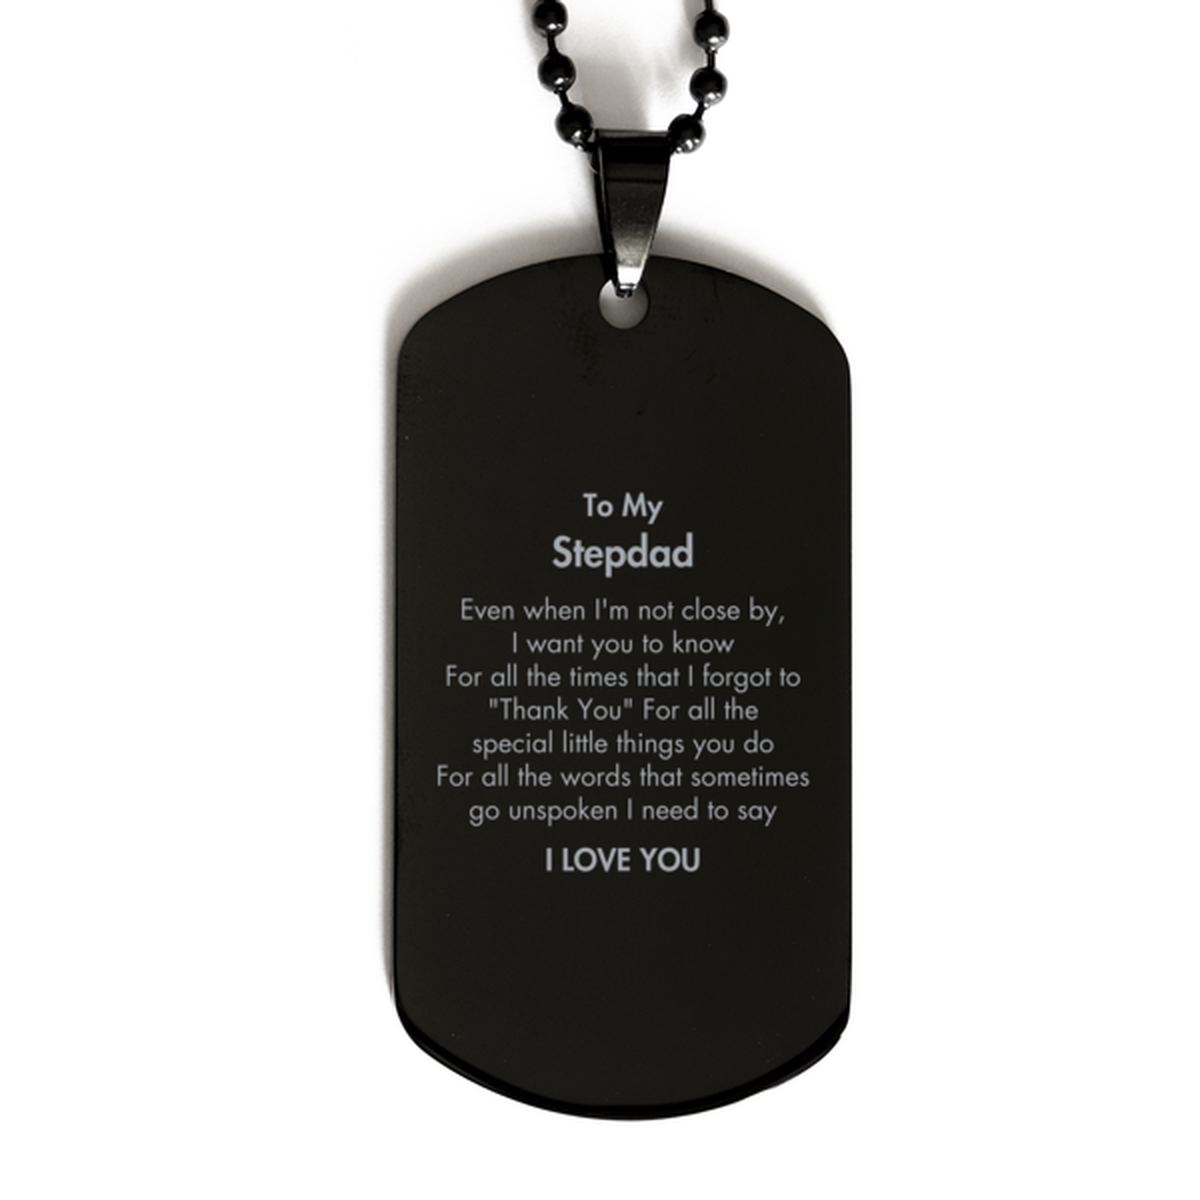 Thank You Gifts for Stepdad, Keepsake Black Dog Tag Gifts for Stepdad Birthday Mother's day Father's Day Stepdad For all the words That sometimes go unspoken I need to say I LOVE YOU